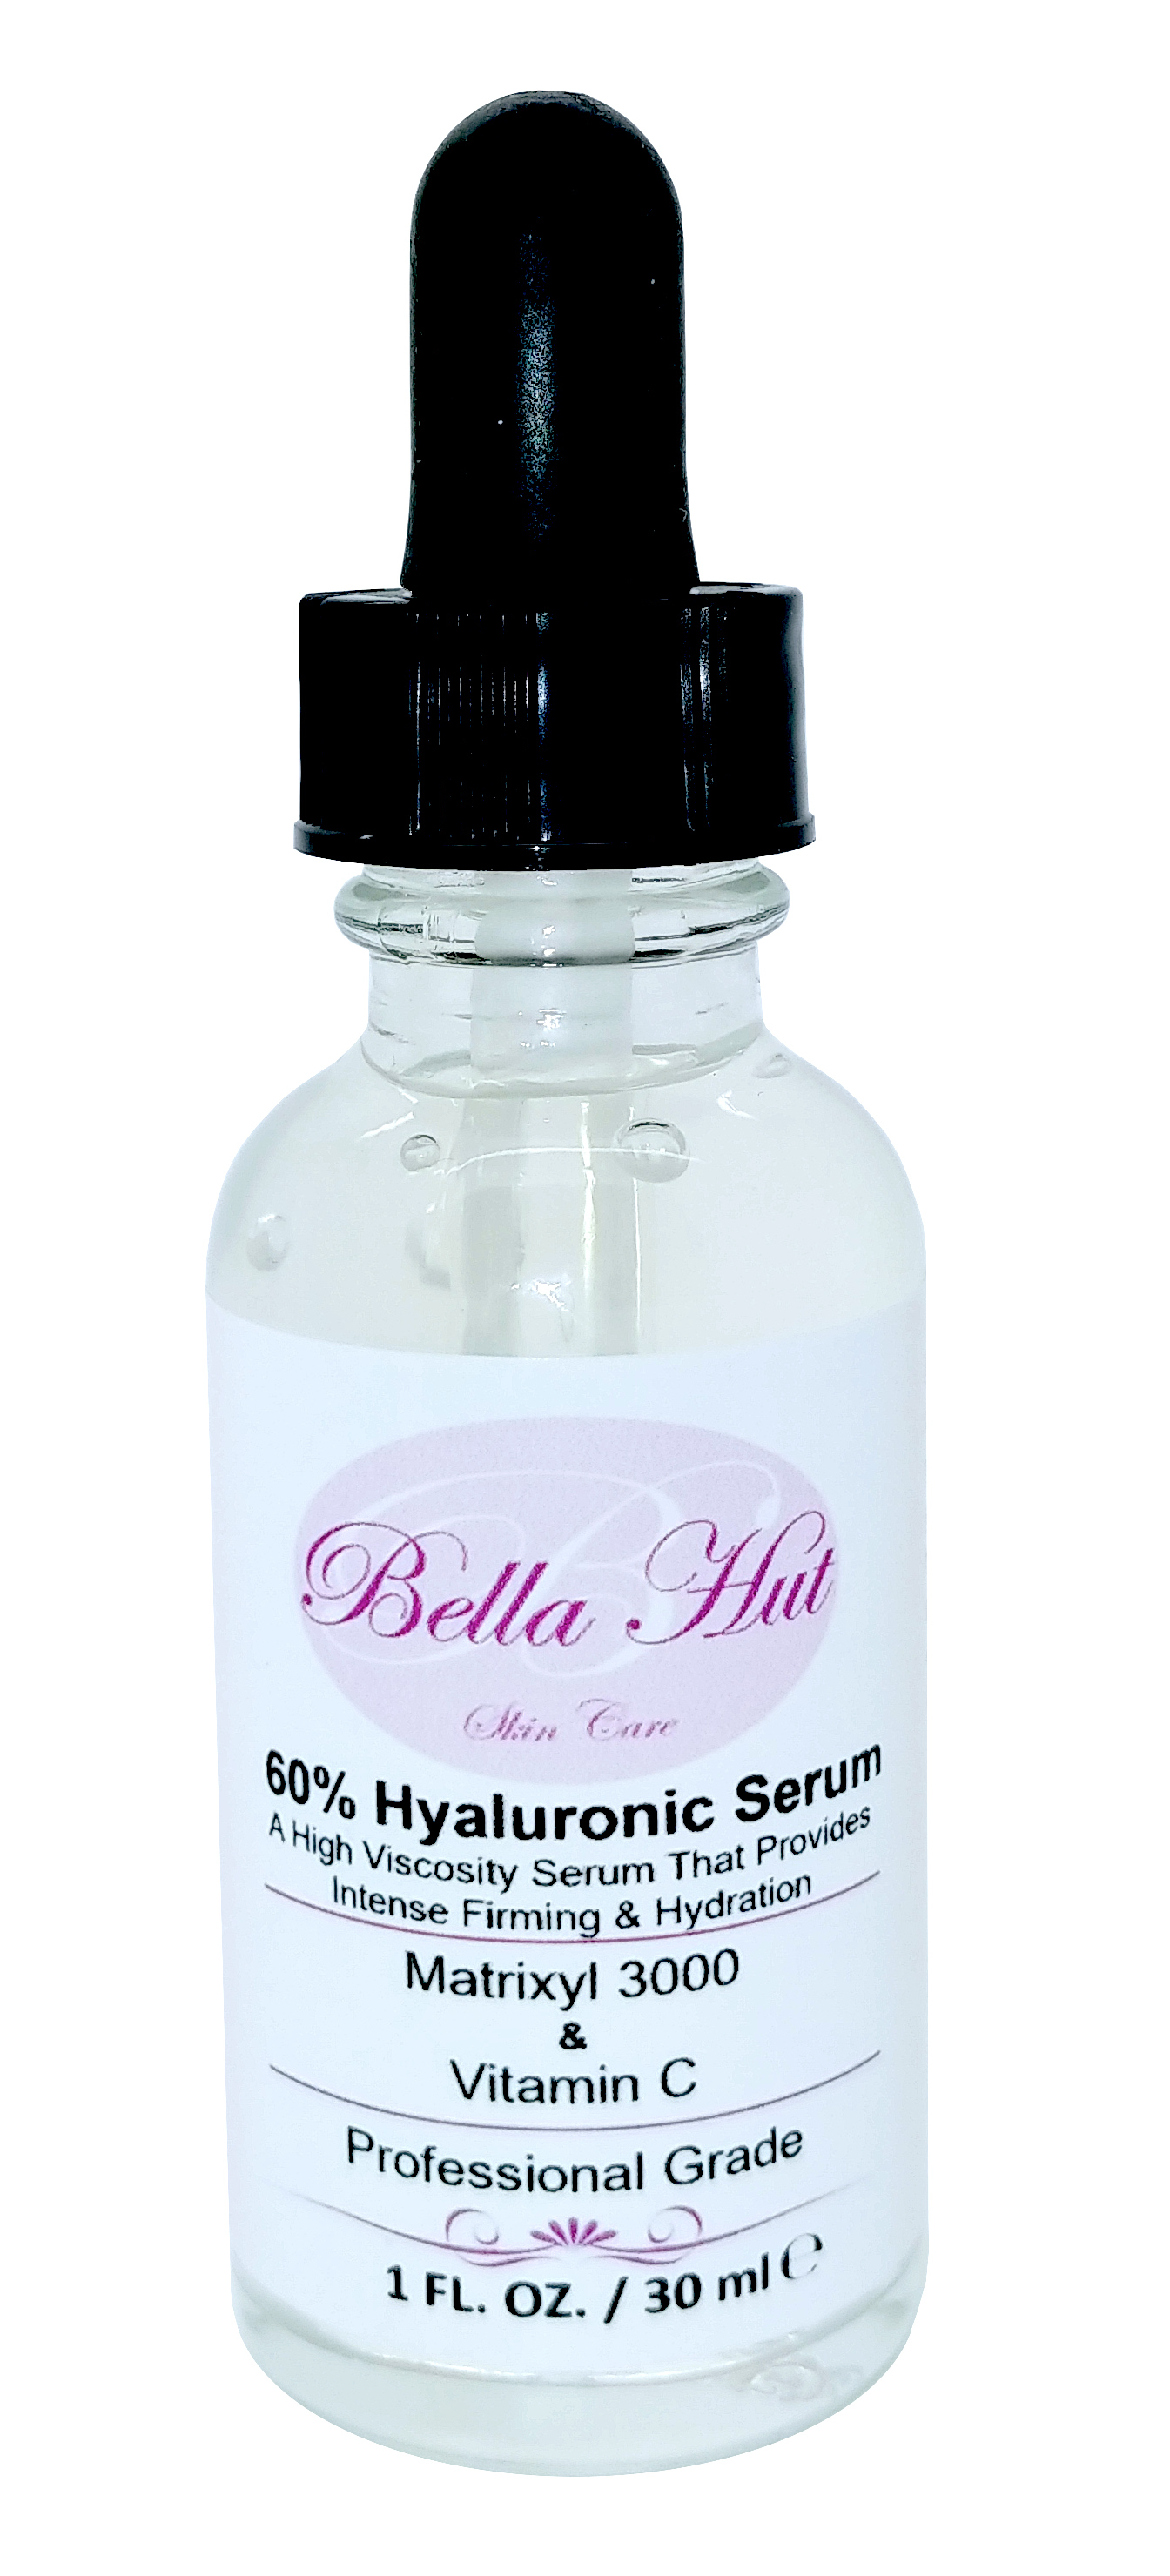 60% Hyaluronic Acid Serum with Matrixyl 3000™ And Vitamin C to reduce wrinkles, fine lines and mositurize skin